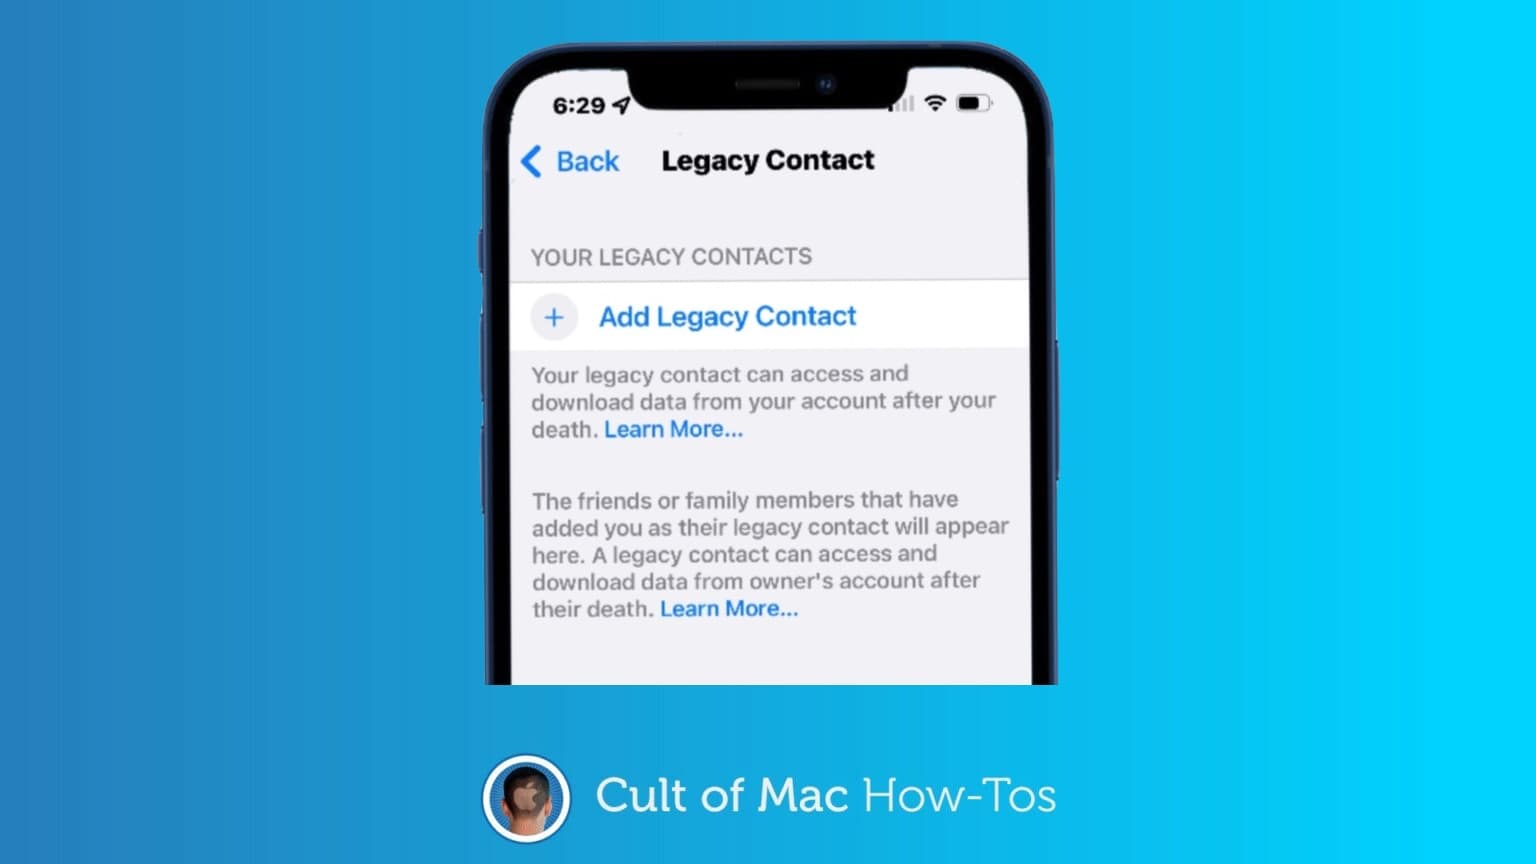 How to set a legacy contact on iPhone or iPad